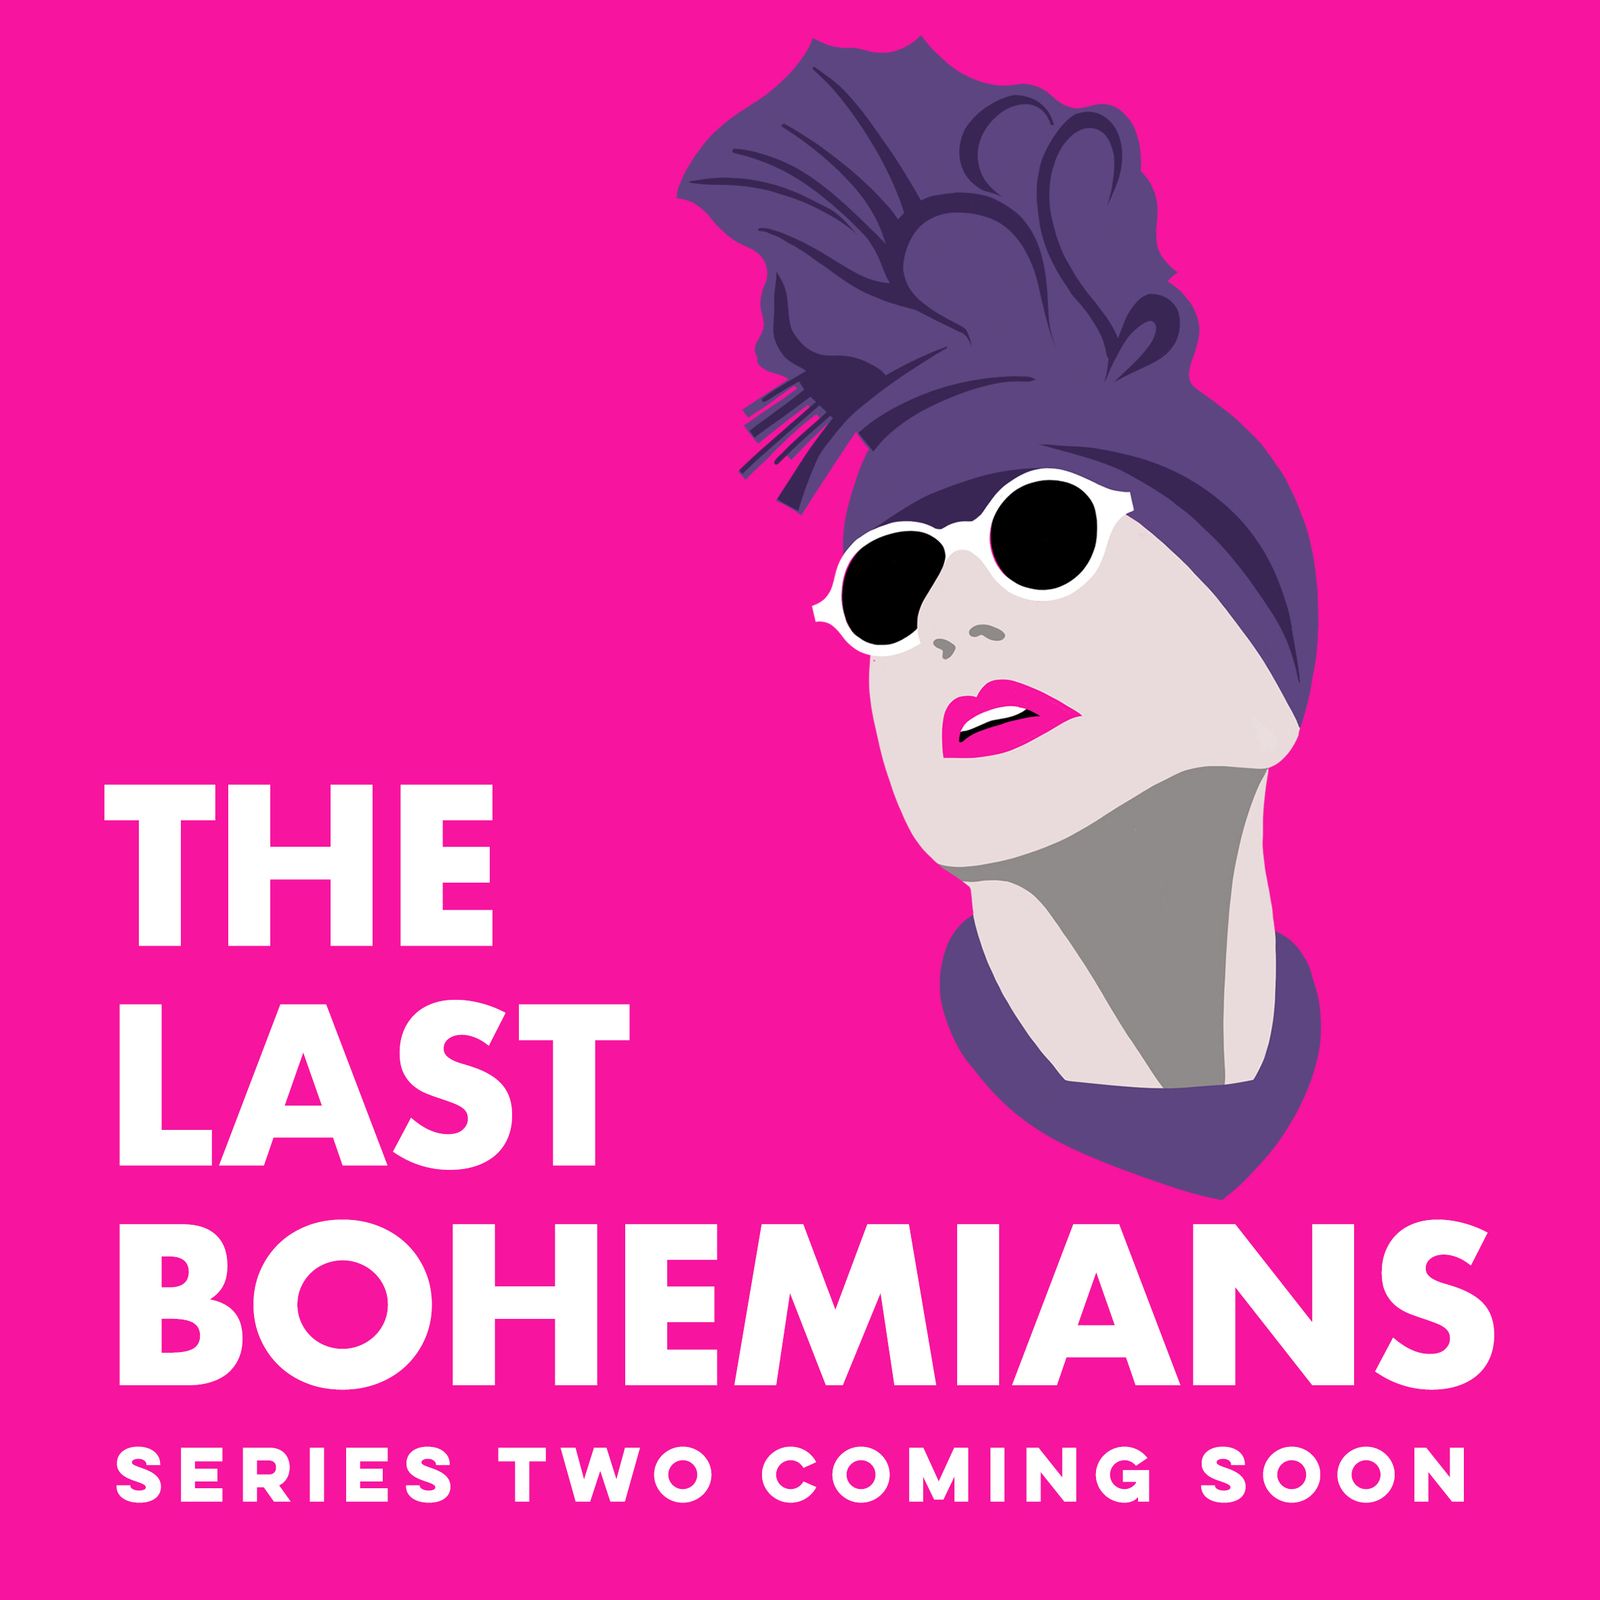 S2: The Last Bohemians – Series Two Trailer – Launching 2 March 2020